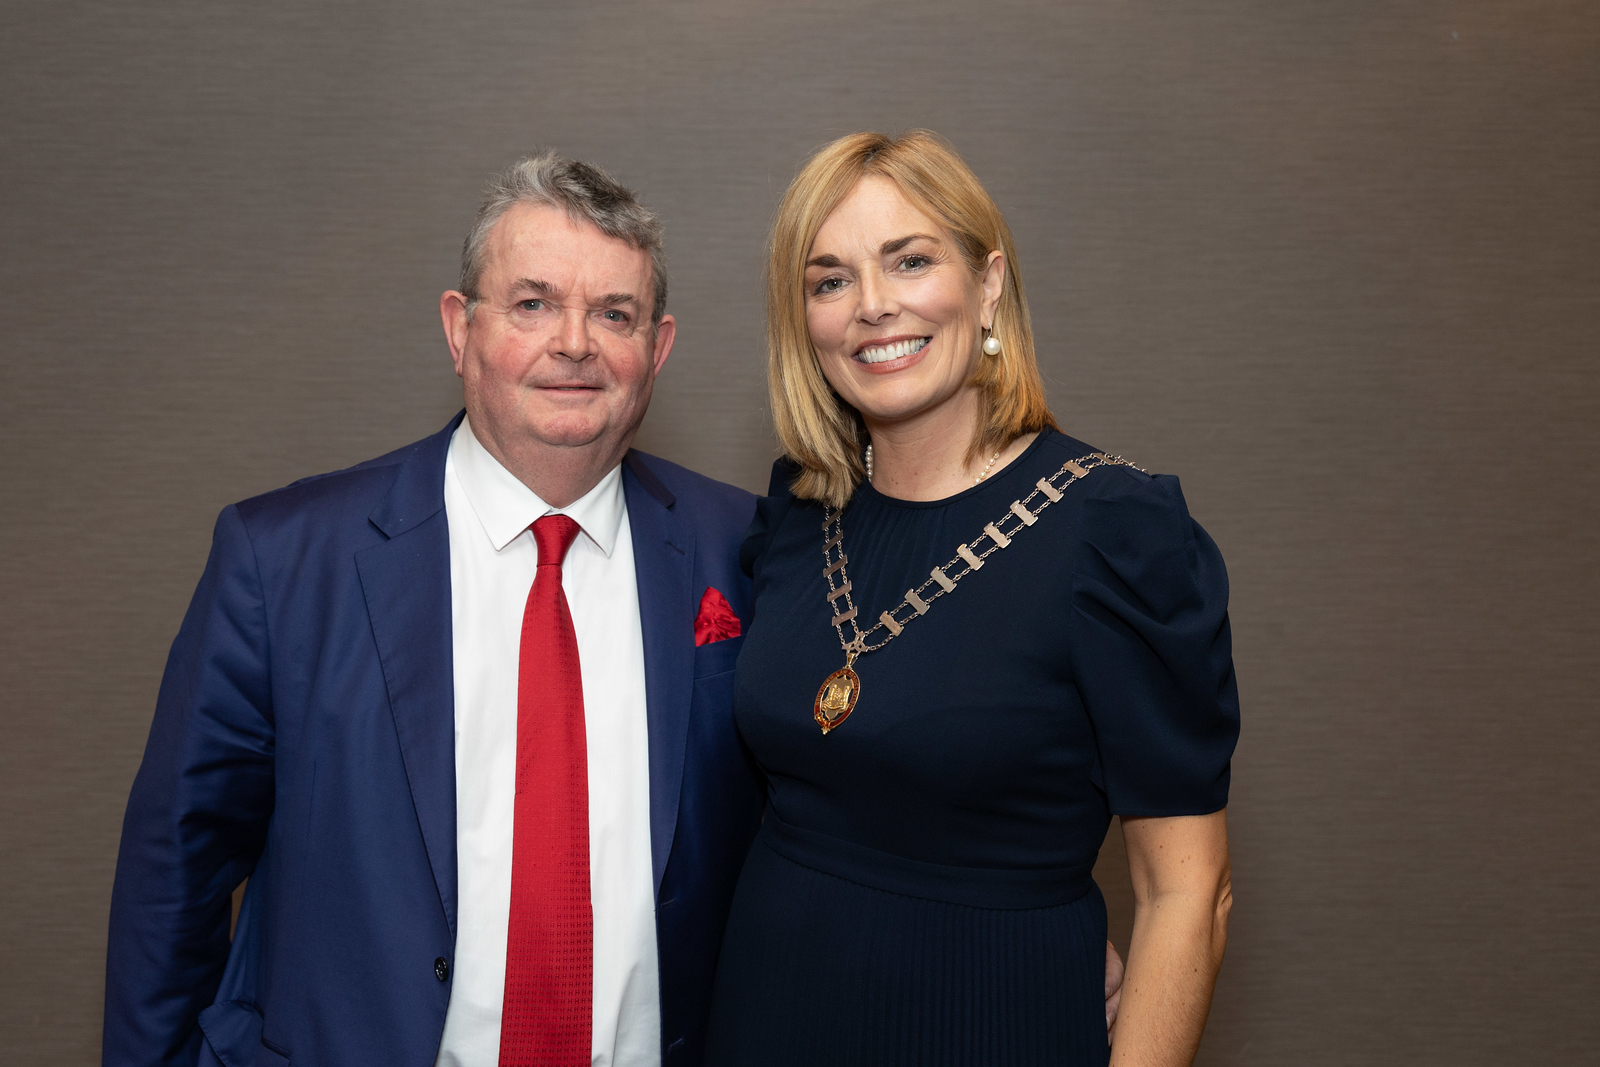 Emma Meagher Neville elected president of Southern Law Association